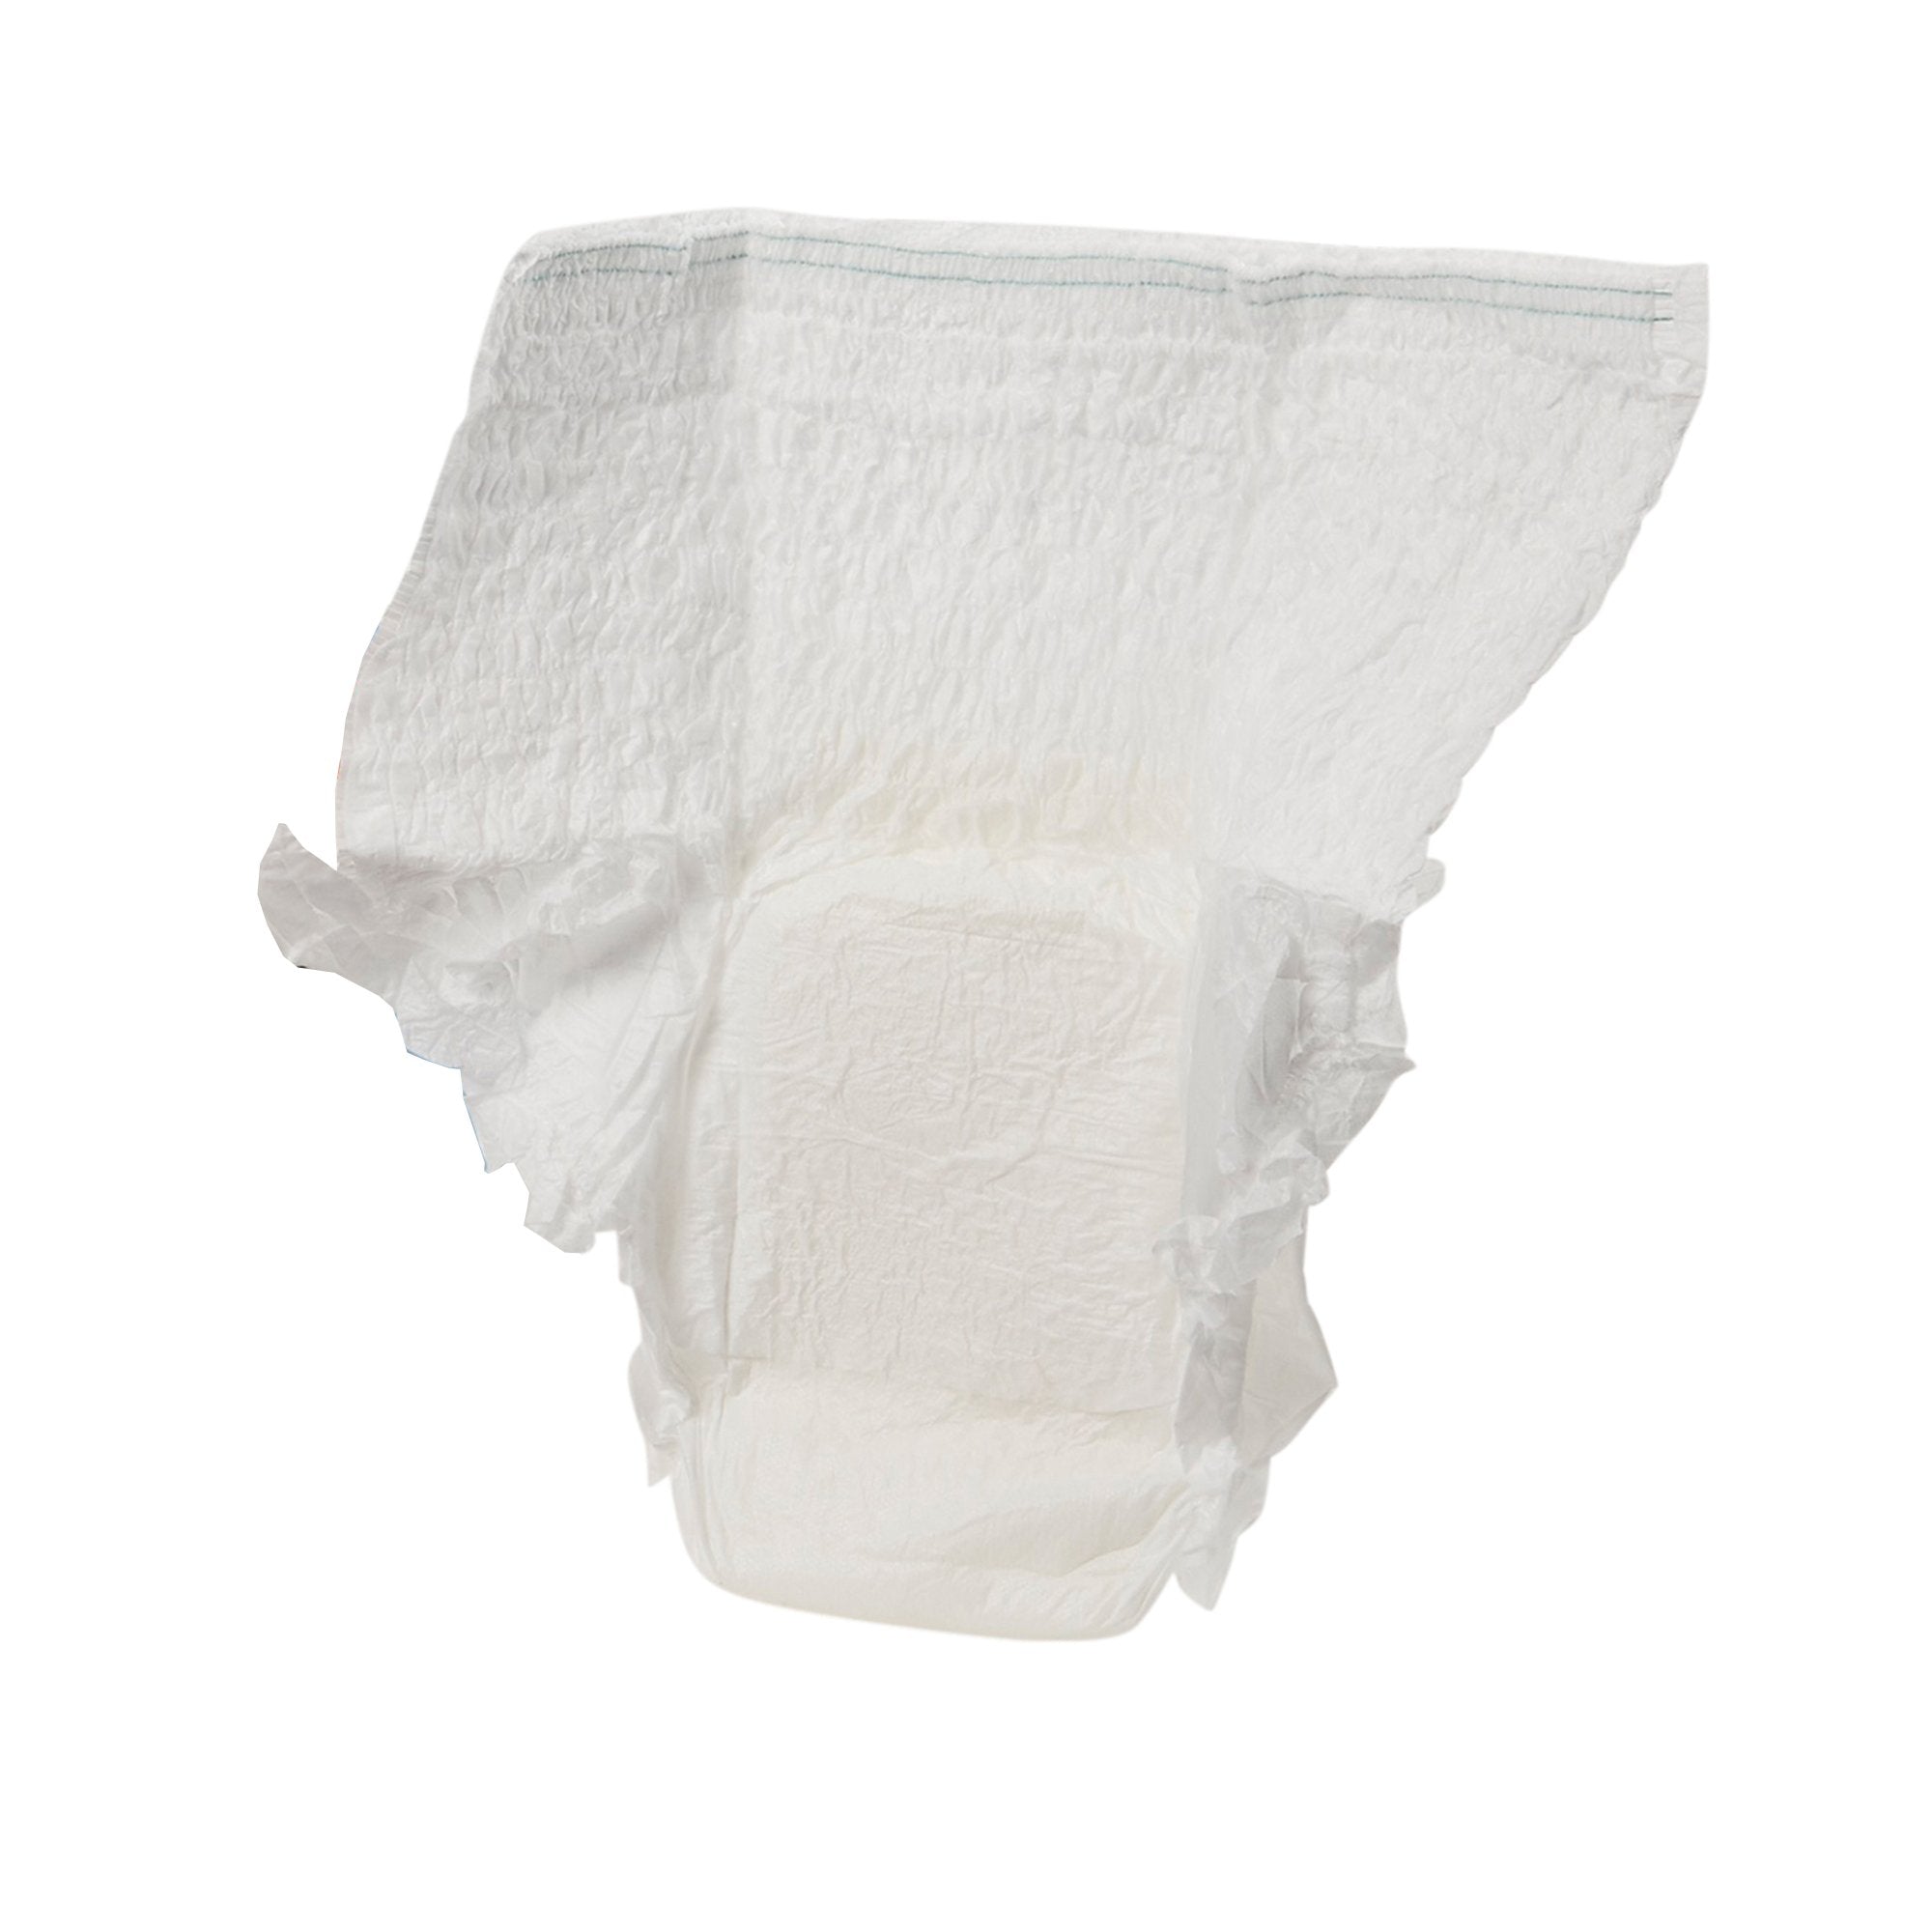 Unisex Adult Absorbent Underwear Simplicity Extra Pull On with Tear Away Seams X-Large Disposable Moderate Absorbency